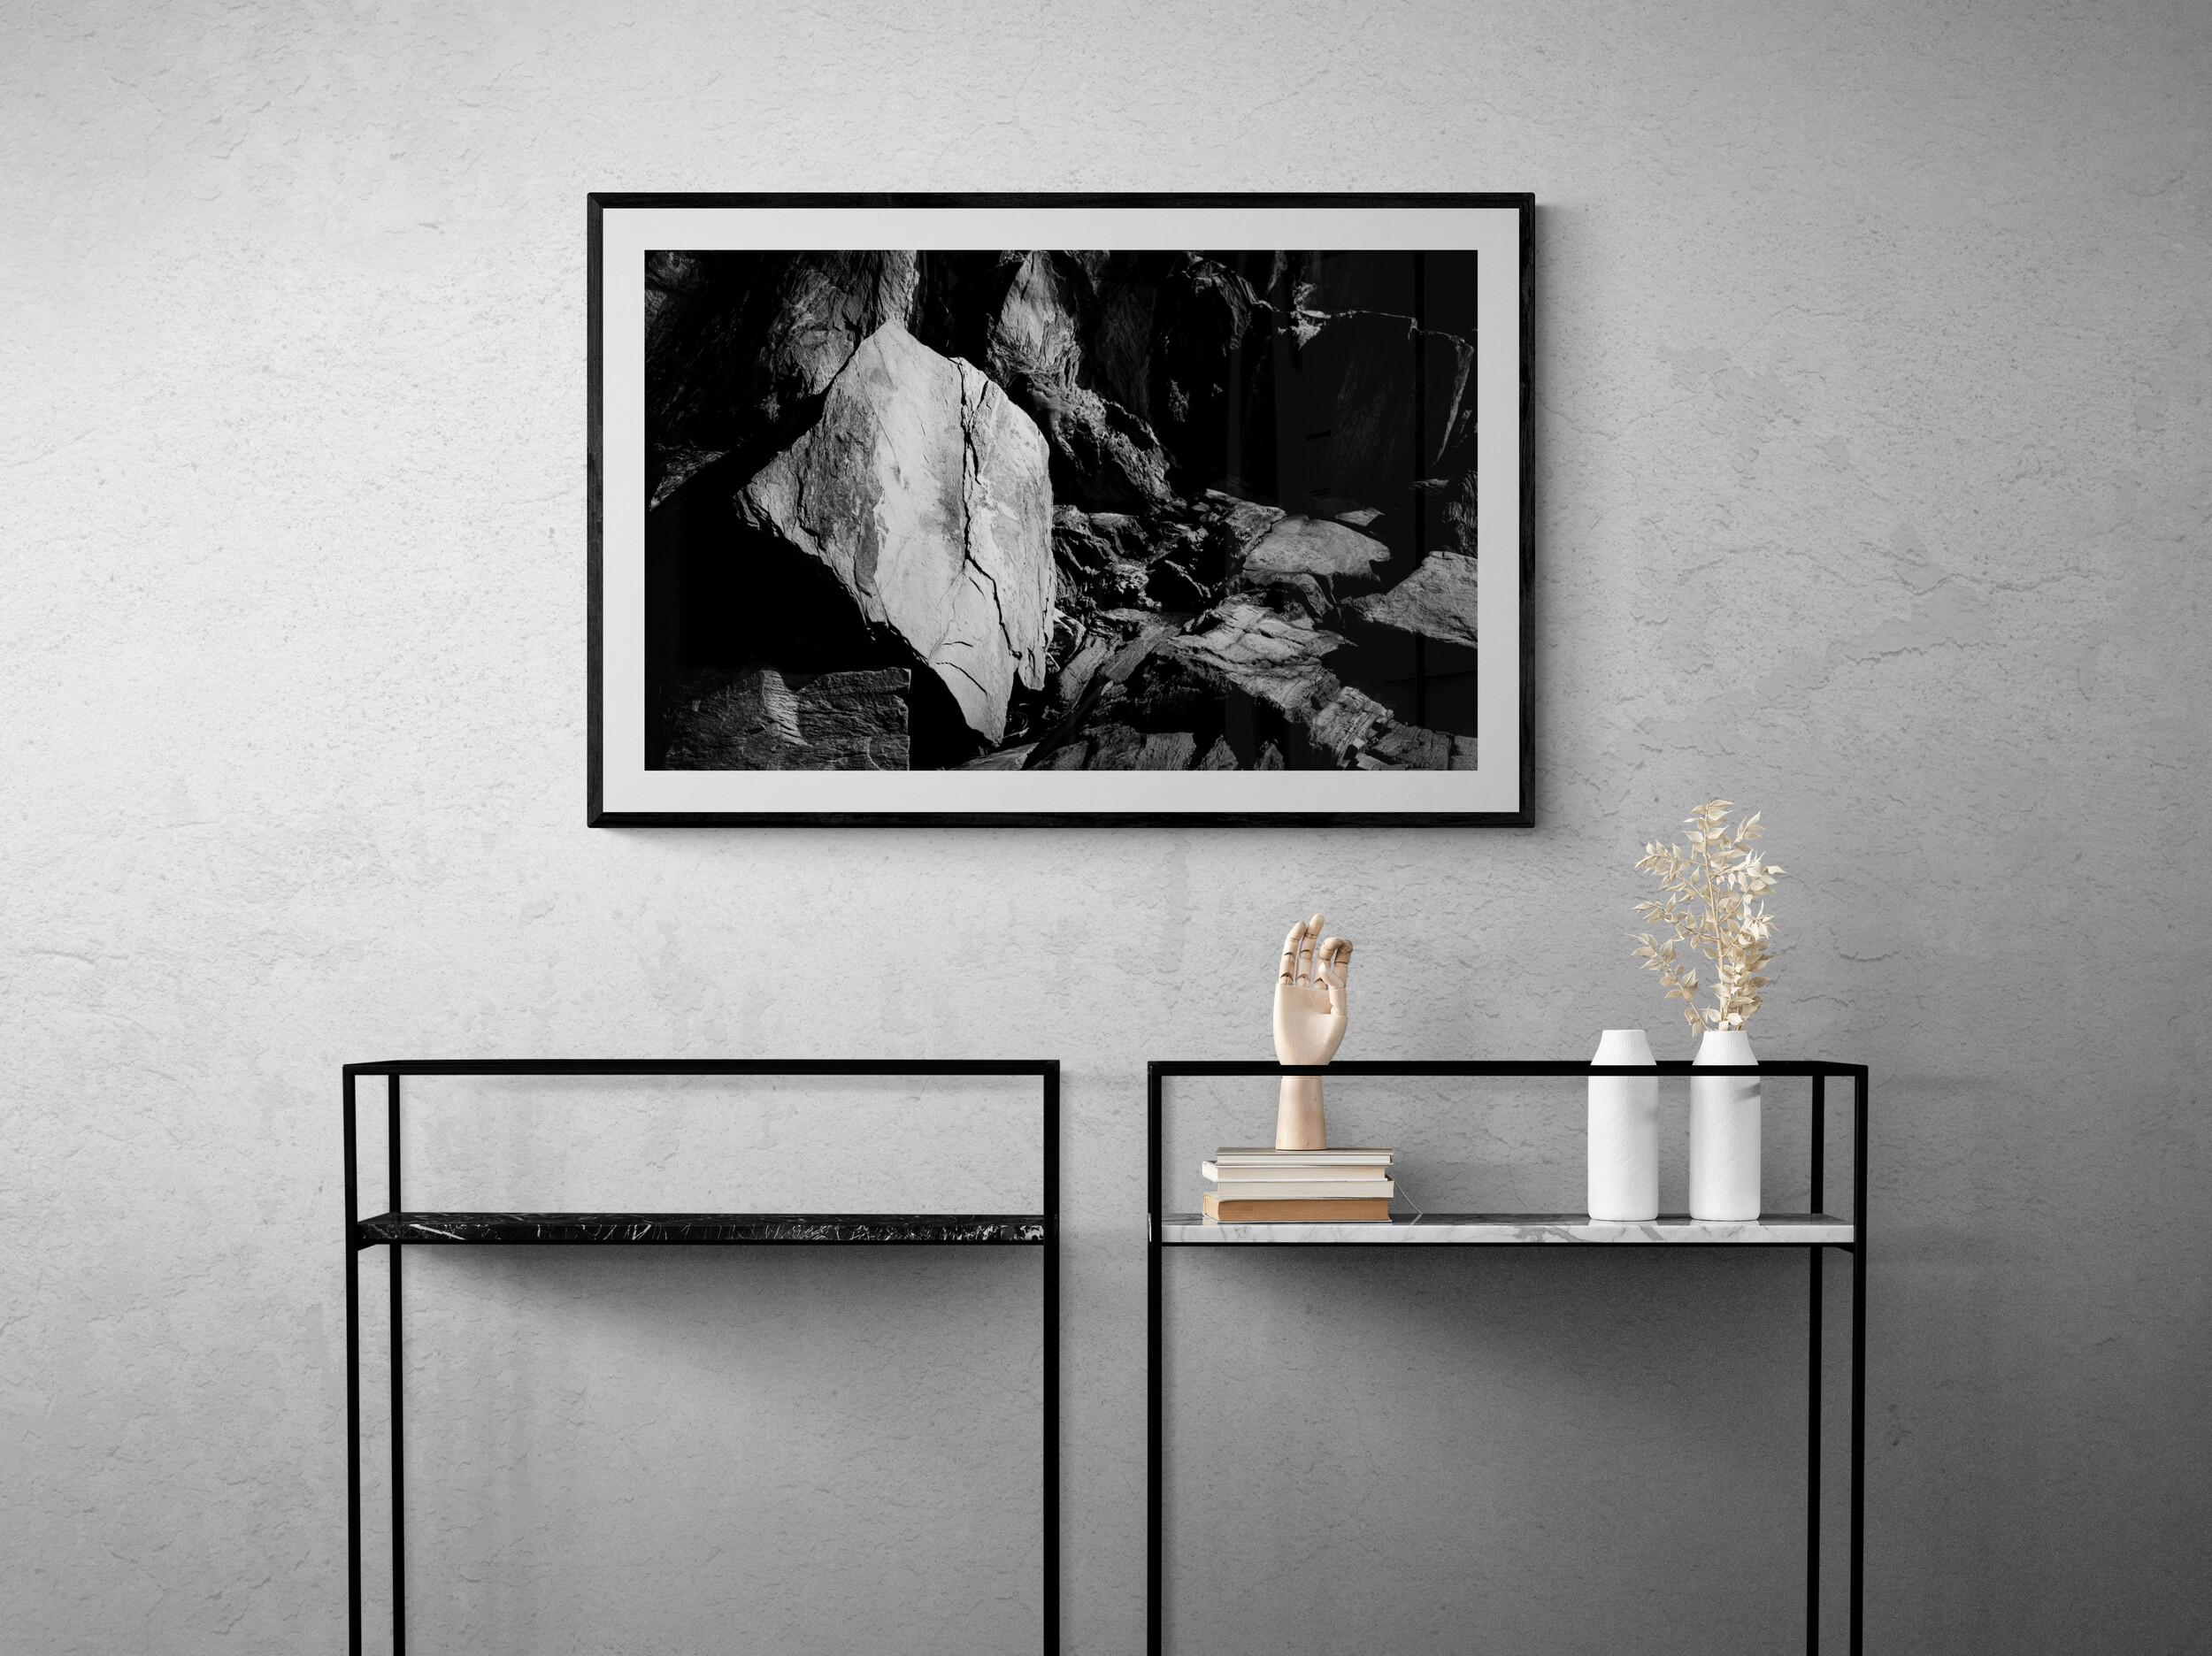  Limited Edition Black and White Photograph - 